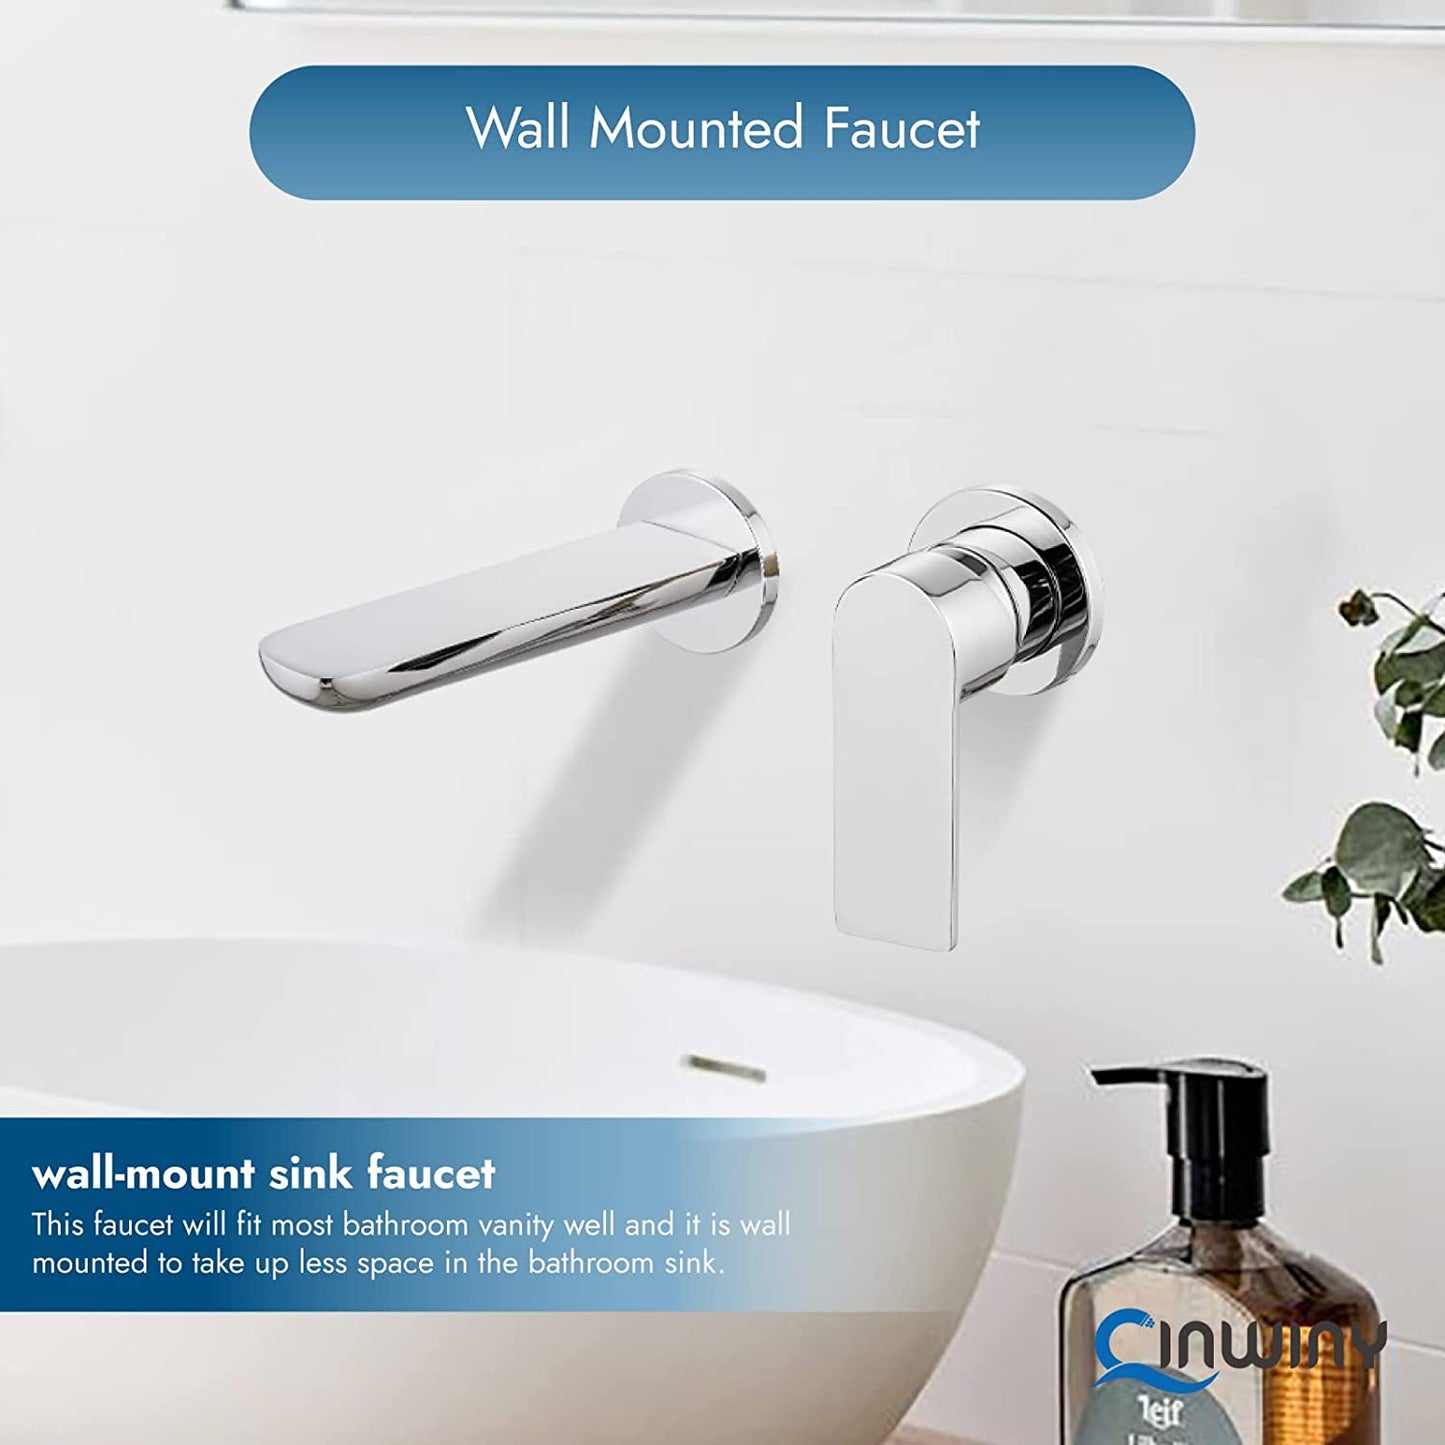 
                  
                    Cinwiny Wall Mount Bathroom Sink Faucet One Lever Handle SUS304 Lavatory Vanity Vessel Basin Mixer Tap with Solid Brass Rough-in Valve
                  
                